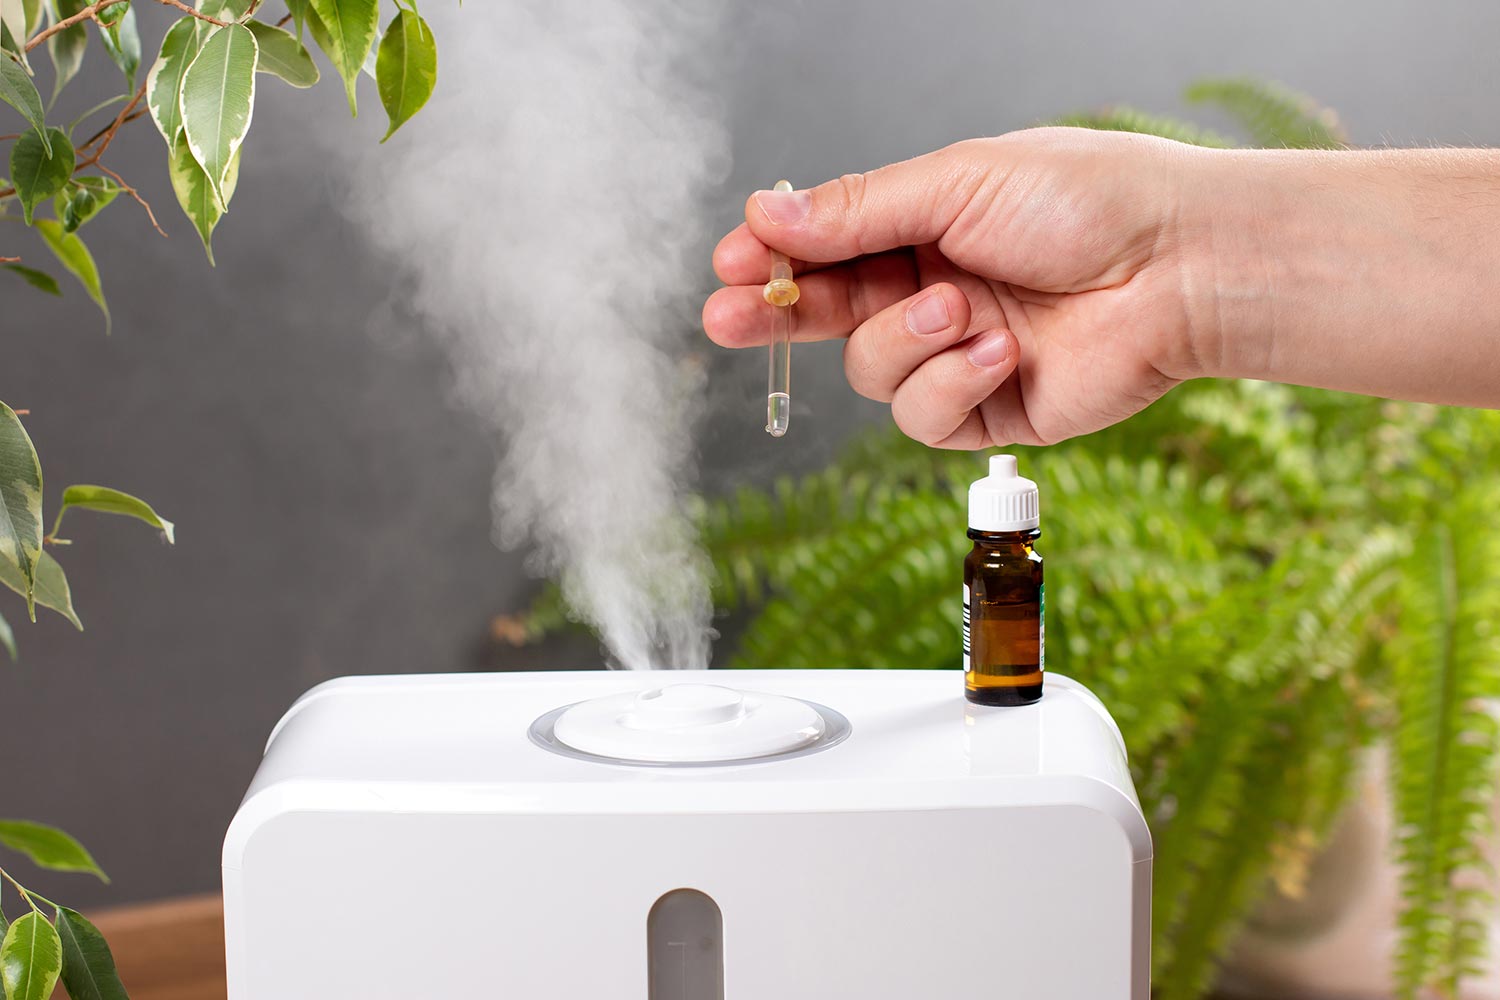 A man is adding essential oil to a humidifier